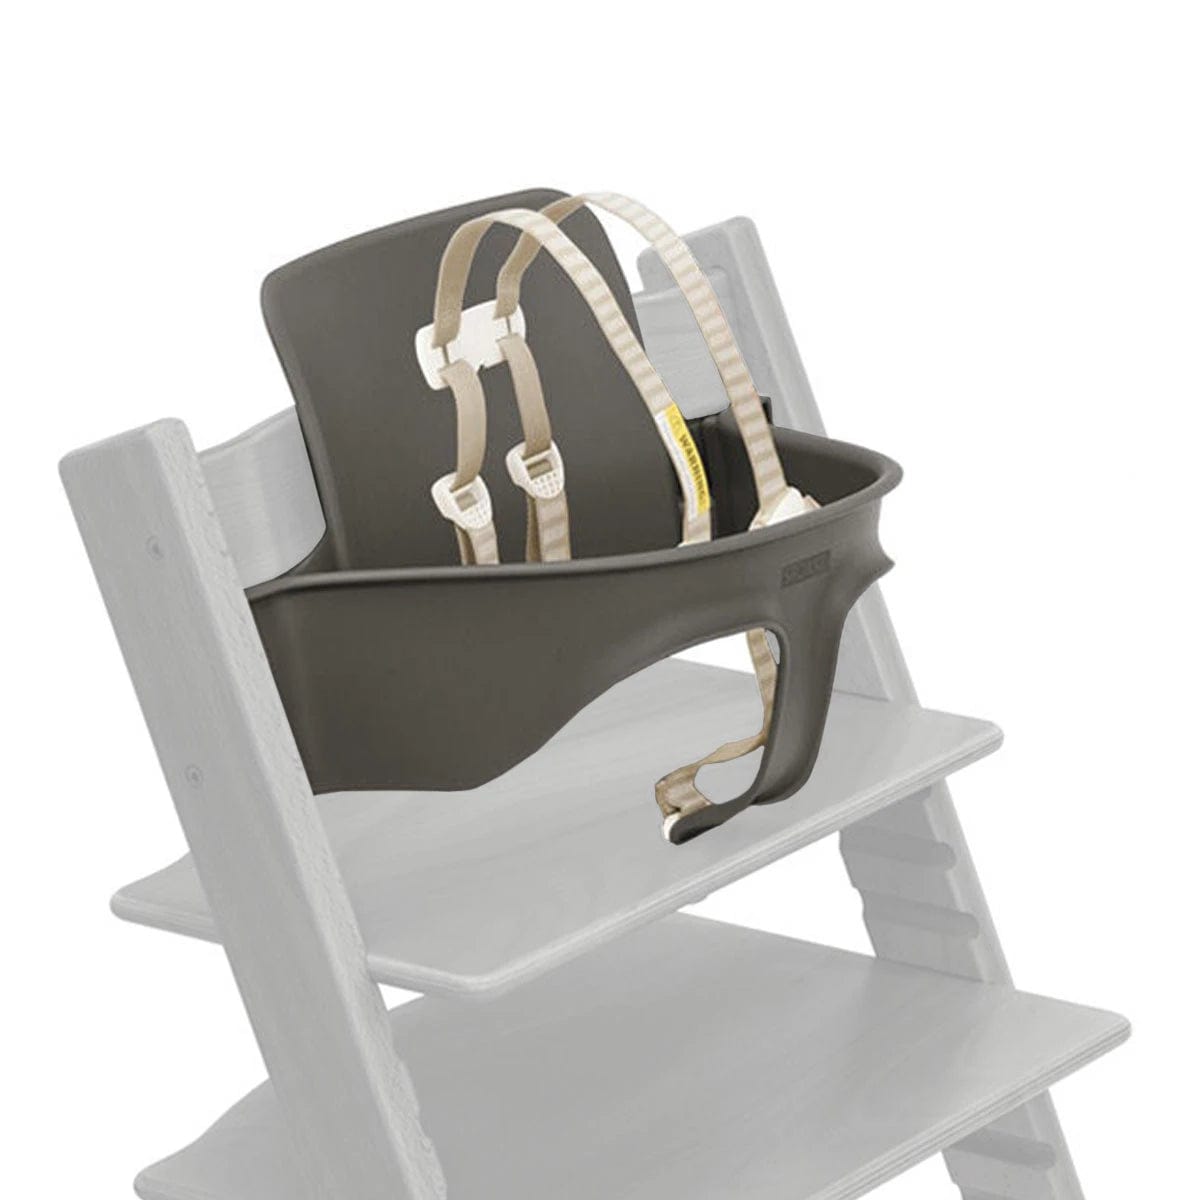 Stokke High Chairs & Booster Seats Natural Stokke Tripp Trapp® Baby Set